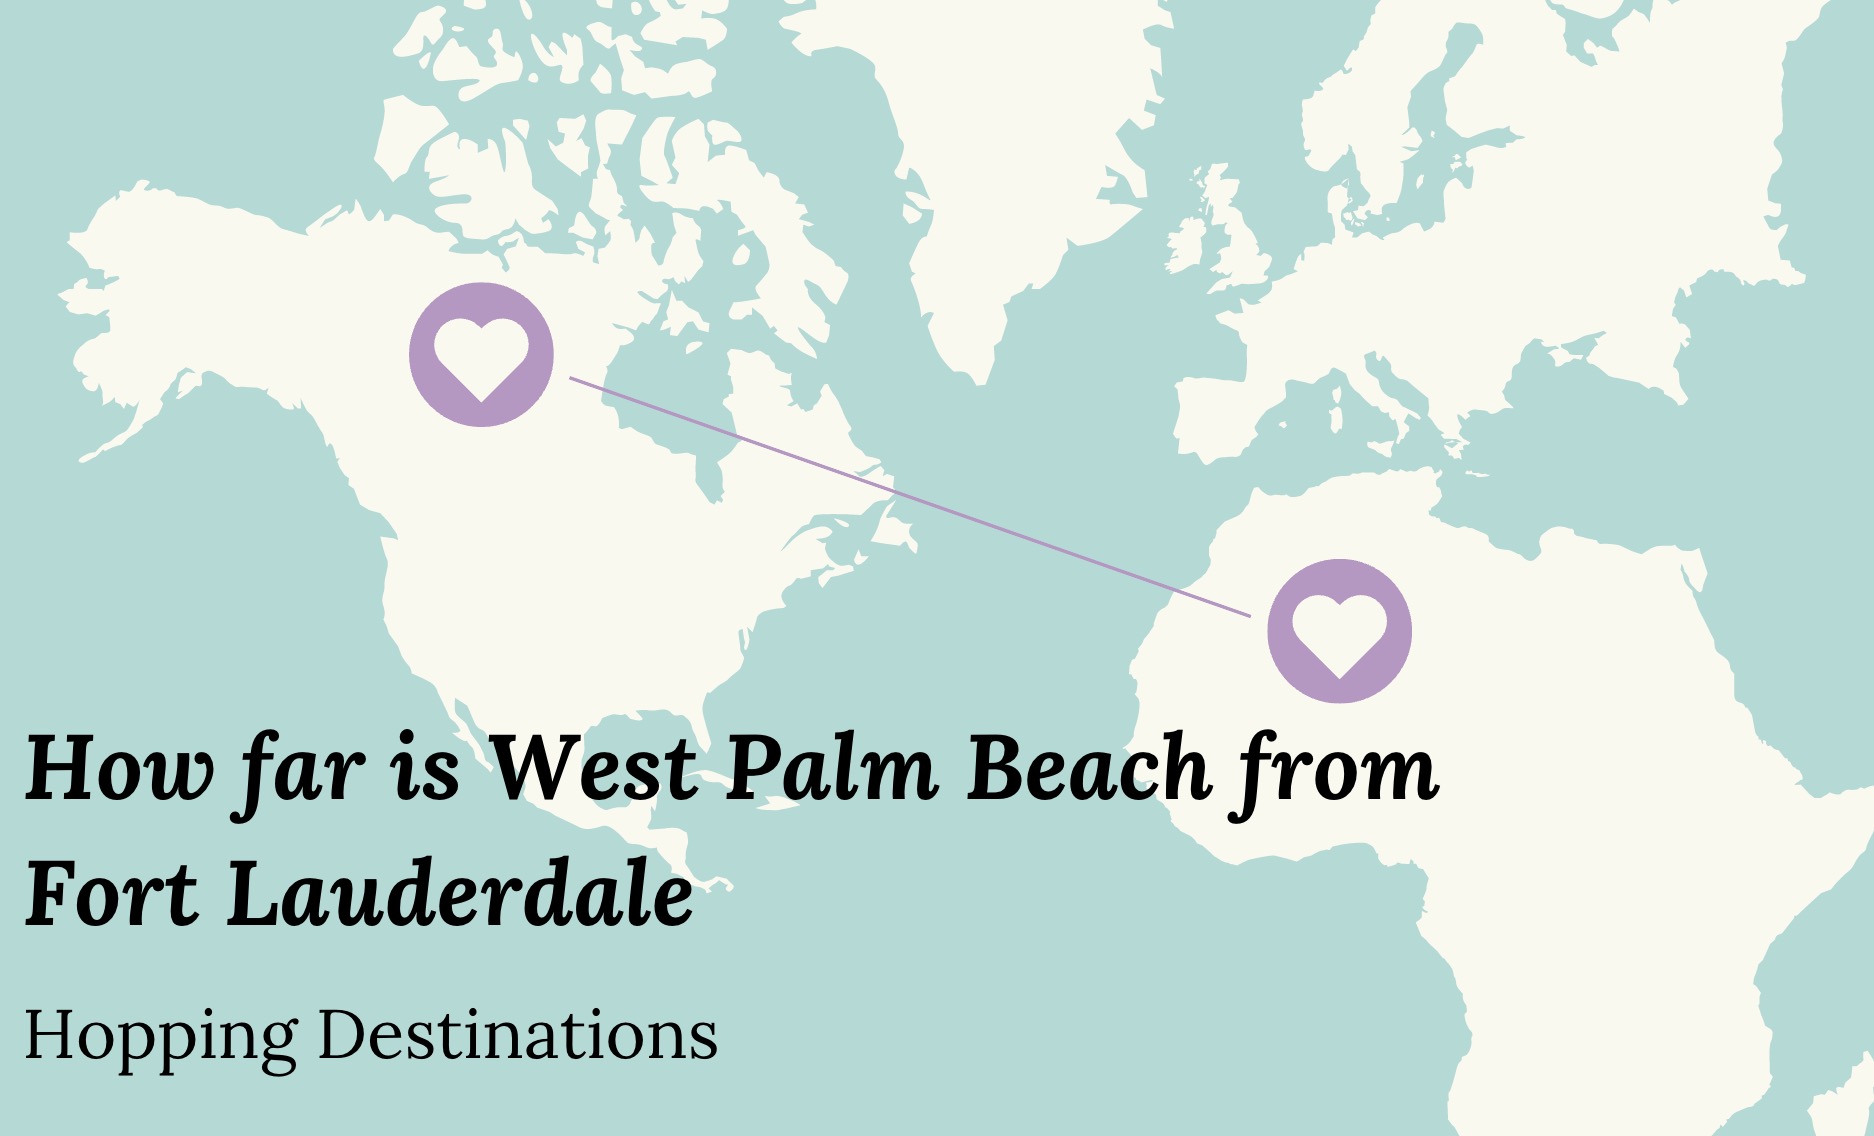 How far is West Palm Beach from Fort Lauderdale